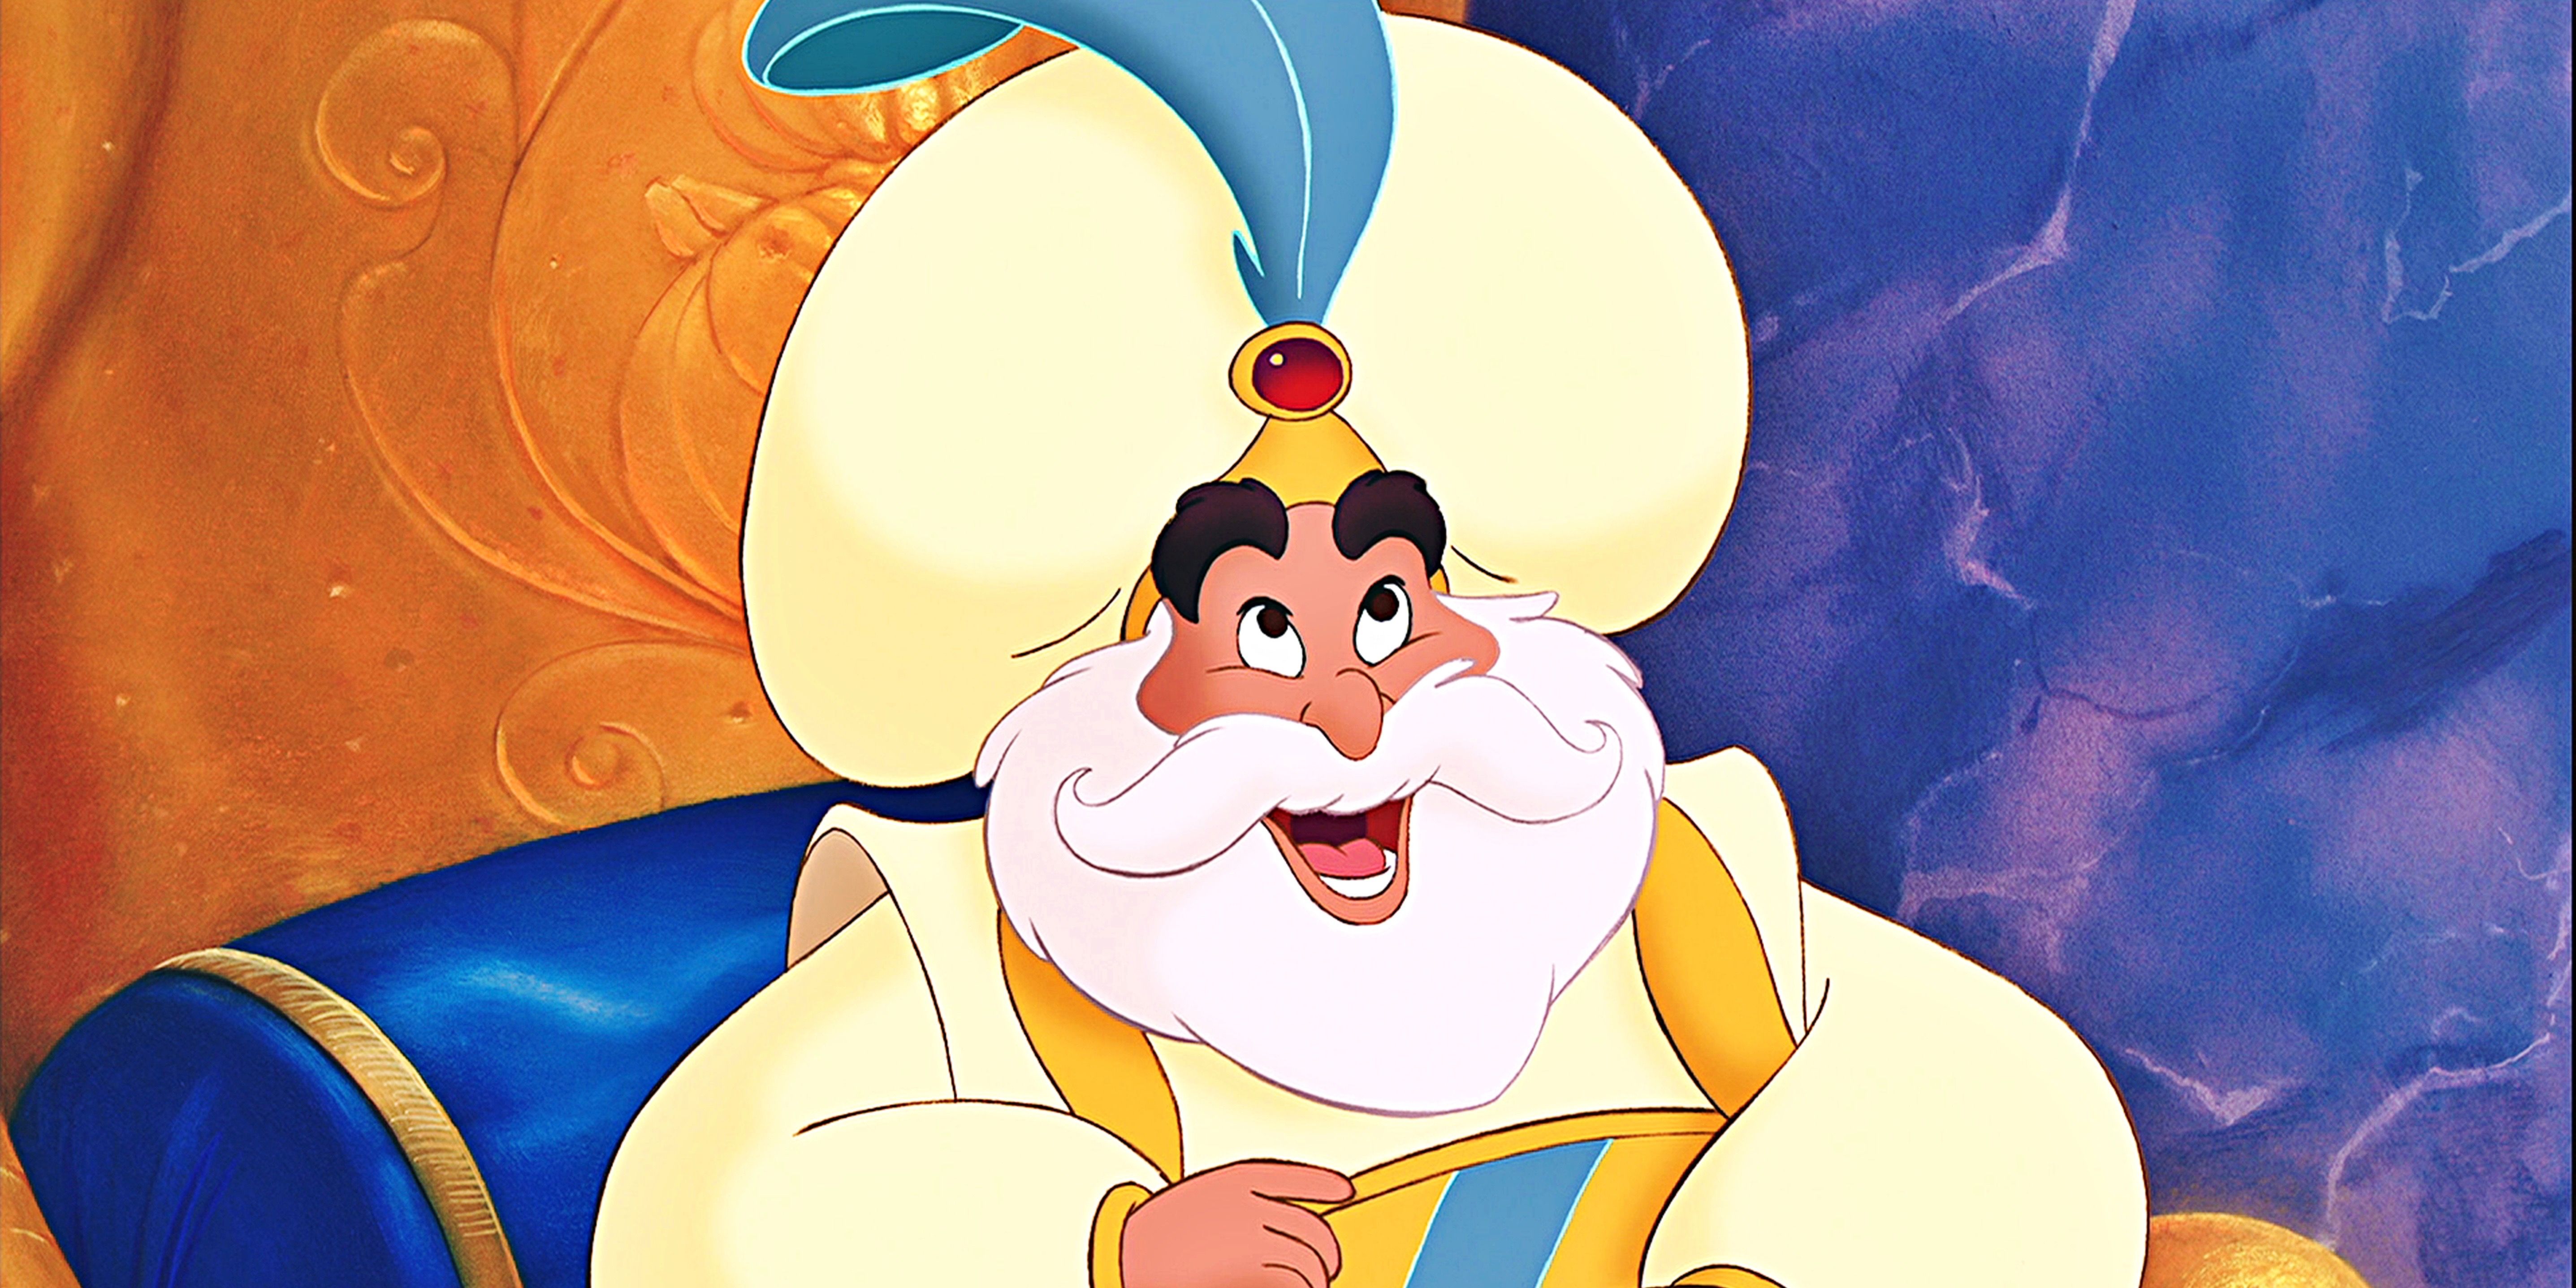 Sultan from Aladdin smiling